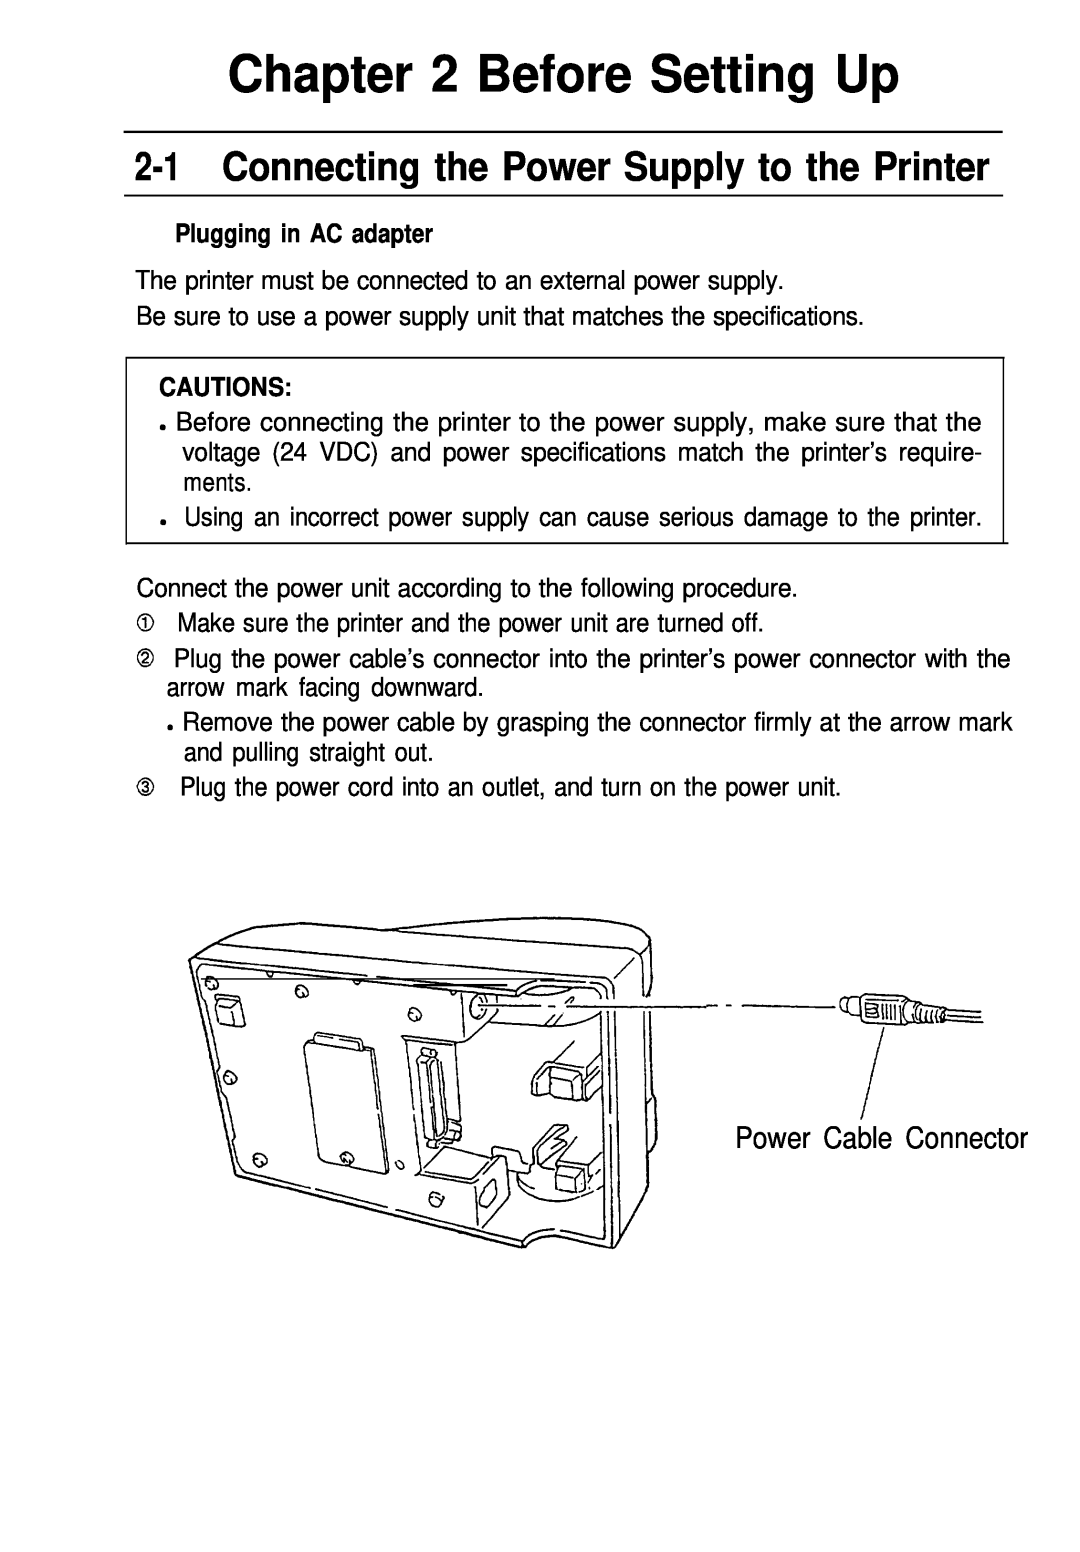 Seiko Group TM-L60 manual Before Setting Up, Connecting the Power Supply to the Printer, n Plugging in AC adapter, Cautions 